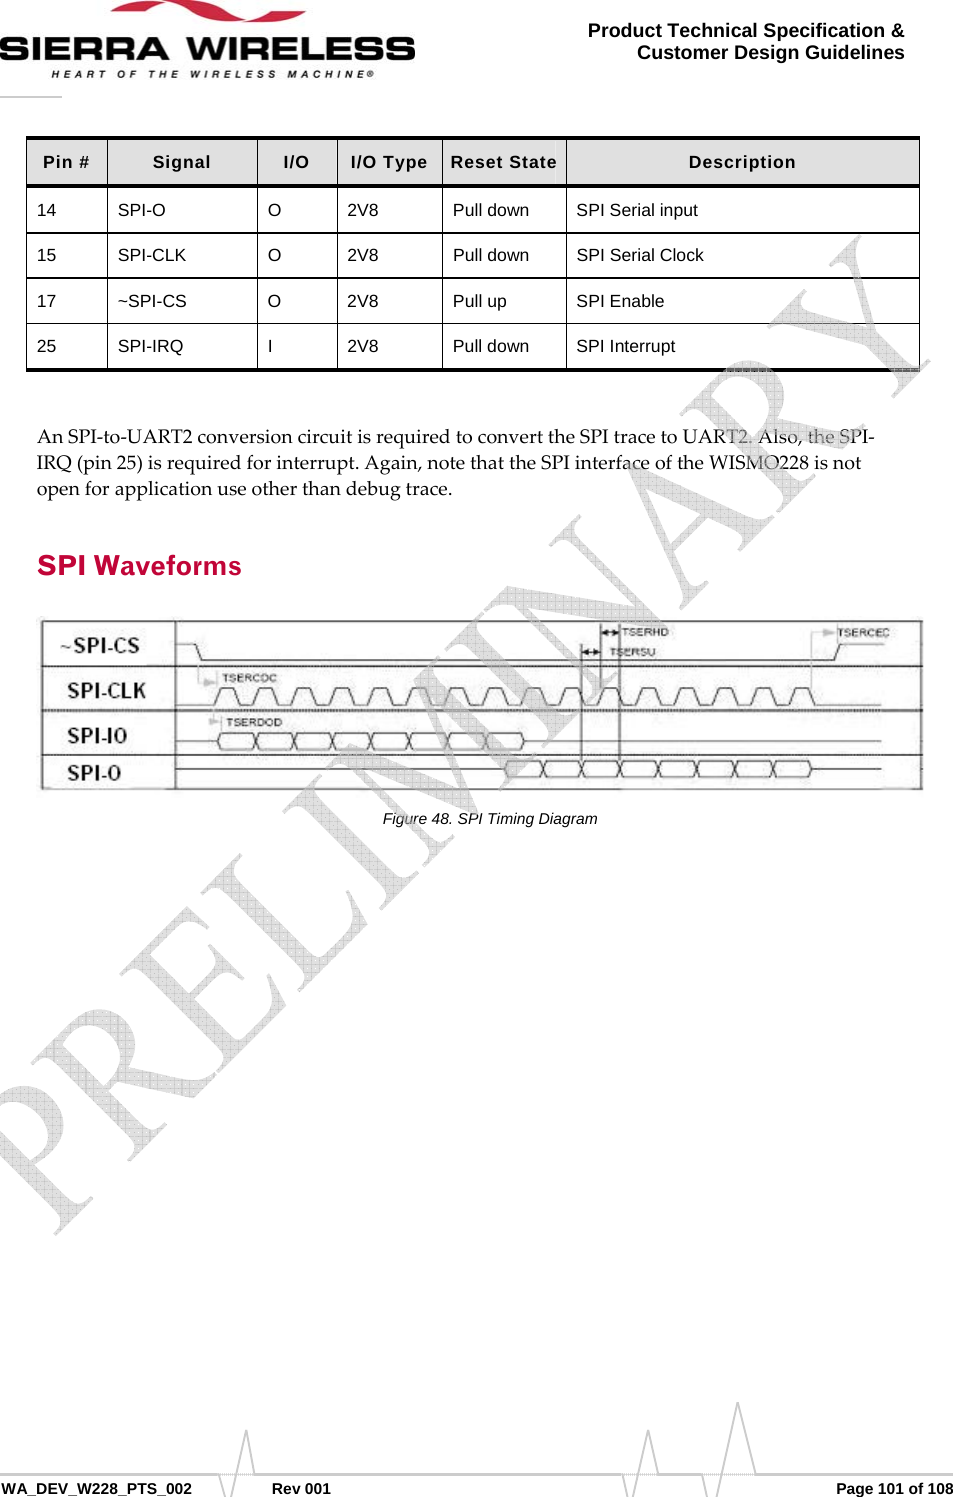      WA_DEV_W228_PTS_002 Rev 001  Page 101 of 108 Product Technical Specification &amp; Customer Design Guidelines Pin #  Signal  I/O  I/O Type  Reset State Description 14 SPI-O  O  2V8  Pull down SPI Serial input 15 SPI-CLK  O  2V8  Pull down SPI Serial Clock 17 ~SPI-CS  O  2V8  Pull up  SPI Enable 25 SPI-IRQ  I  2V8  Pull down SPI Interrupt AnSPI‐to‐UART2conversioncircuitisrequiredtoconverttheSPItracetoUART2.Also,theSPI‐IRQ(pin25)isrequiredforinterrupt.Again,notethattheSPIinterfaceoftheWISMO228isnotopenforapplicationuseotherthandebugtrace.SPI Waveforms Figure 48. SPI Timing Diagram    